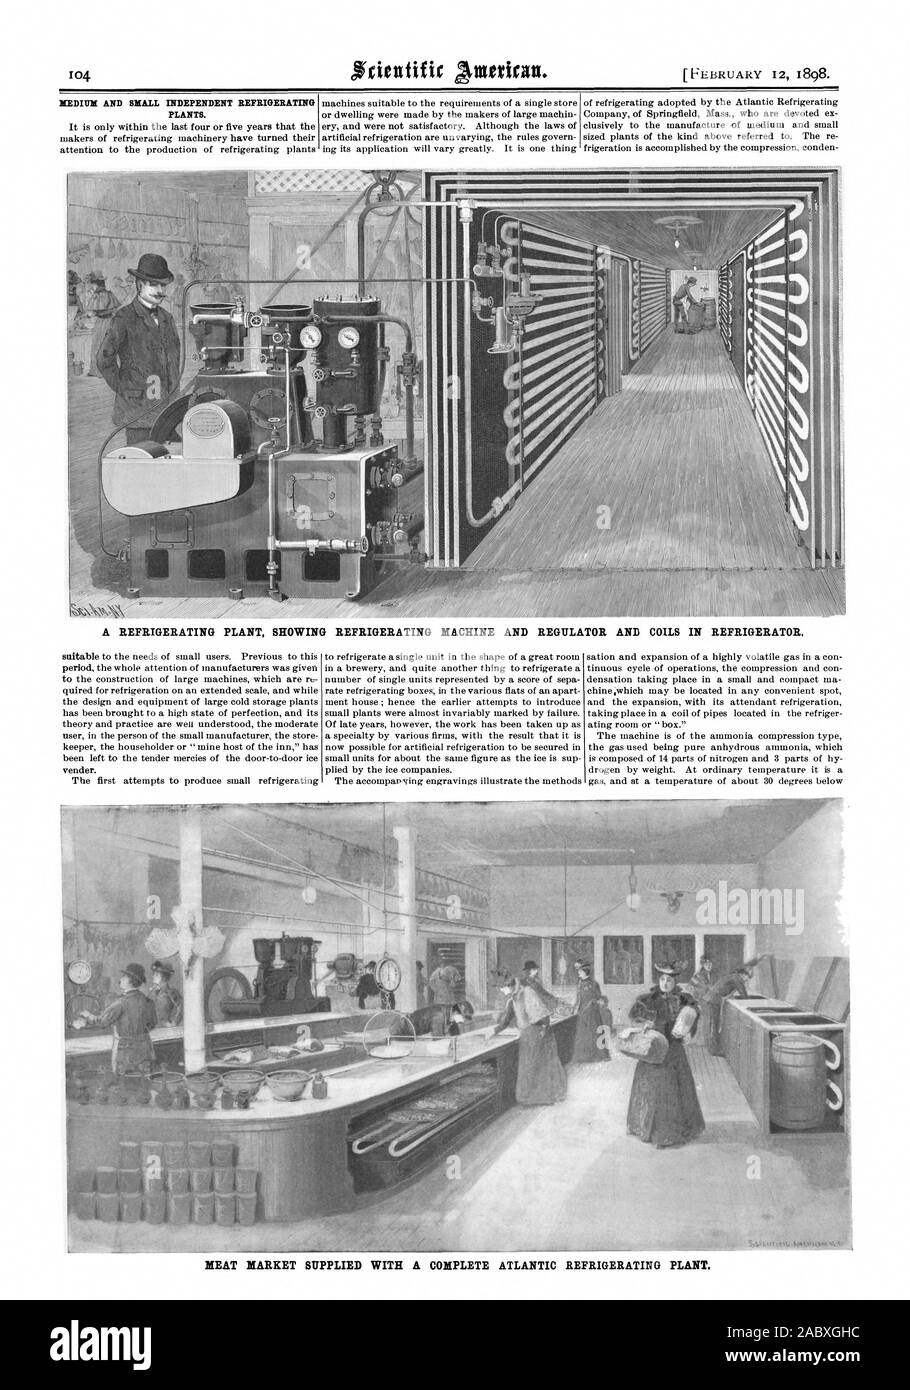 MEDIUM AND SMALL INDEPENDENT REFRIGERATING PLANTS. A REFRIGERATING PLANT SHOWING REFRIGERATING MACHINE AND REGULATOR AND COILS IN REFRIGERATOR. MEAT MARKET SUPPLIED WITH A COMPLETE ATLANTIC REFRIGERATING PLANT., scientific american, 1898-02-12 Stock Photo